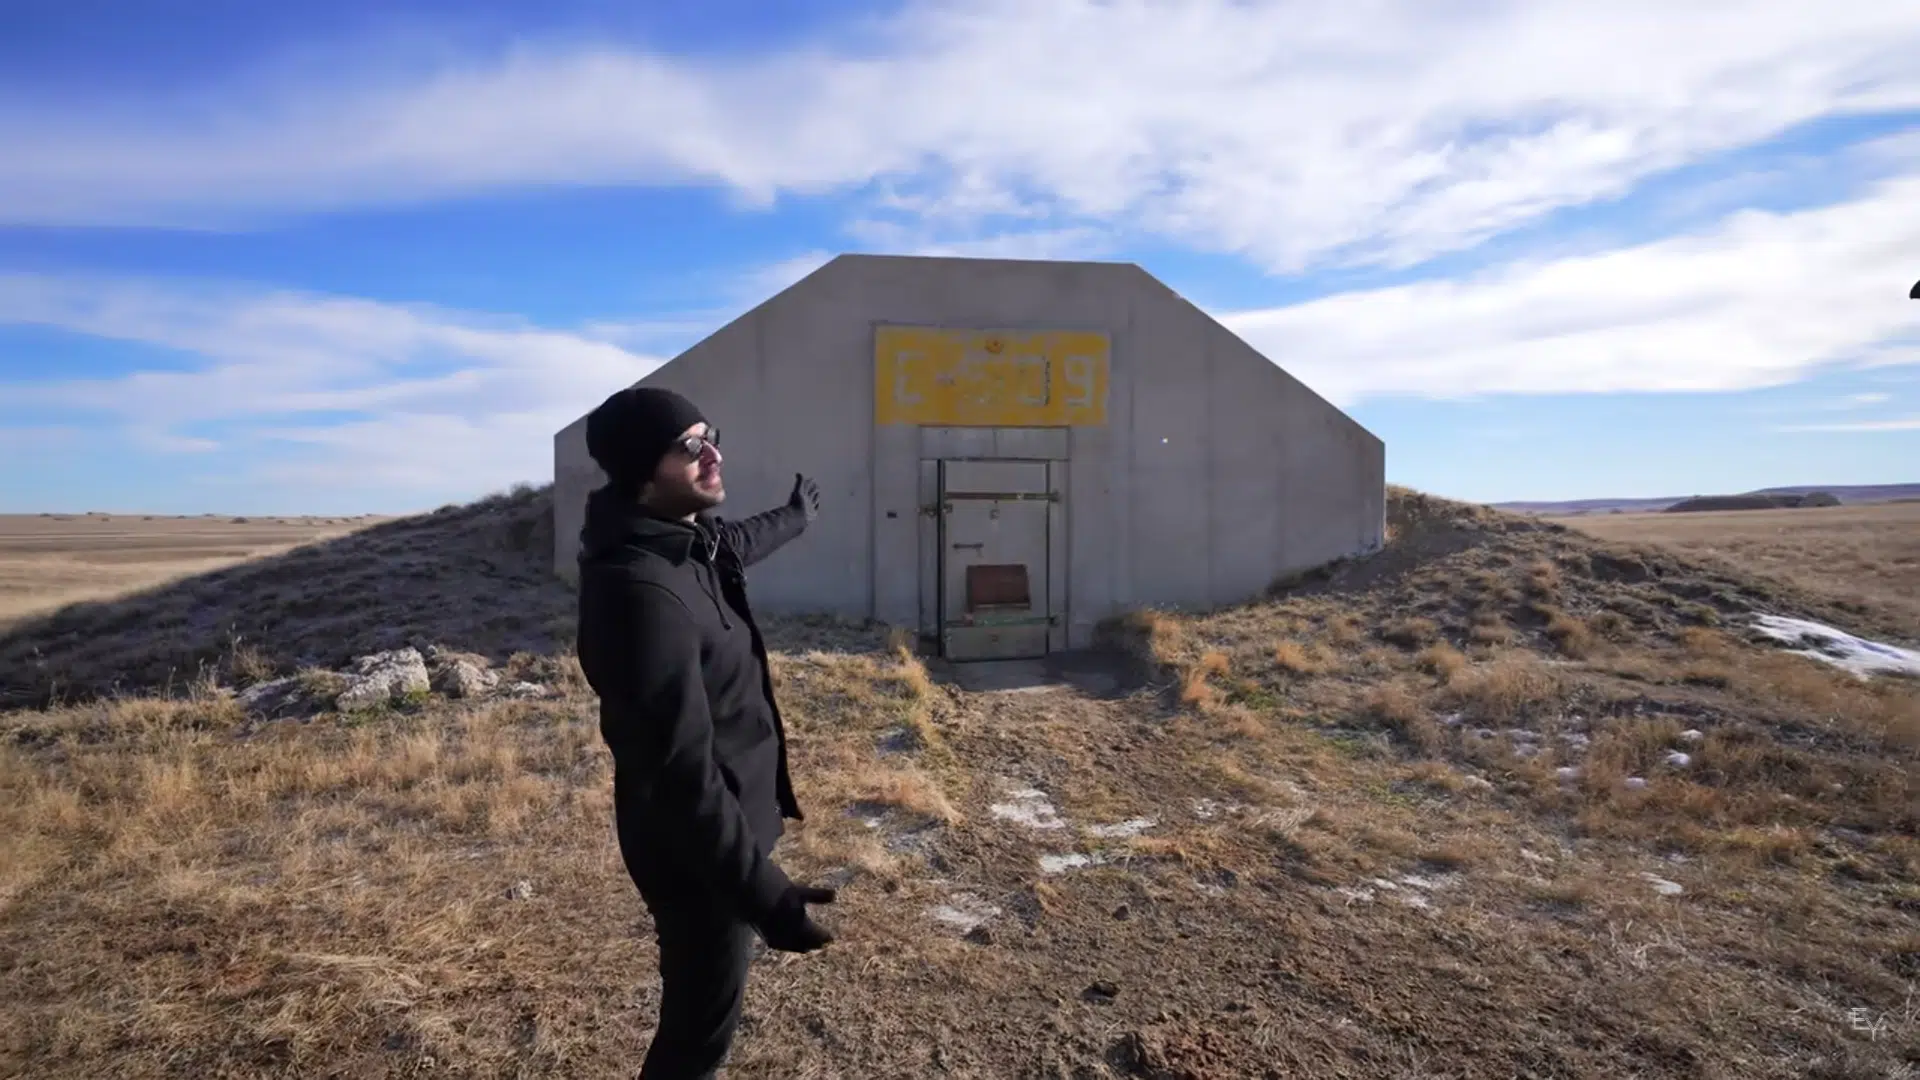 Inside the world’s largest doomsday community home to $55,000 bunkers